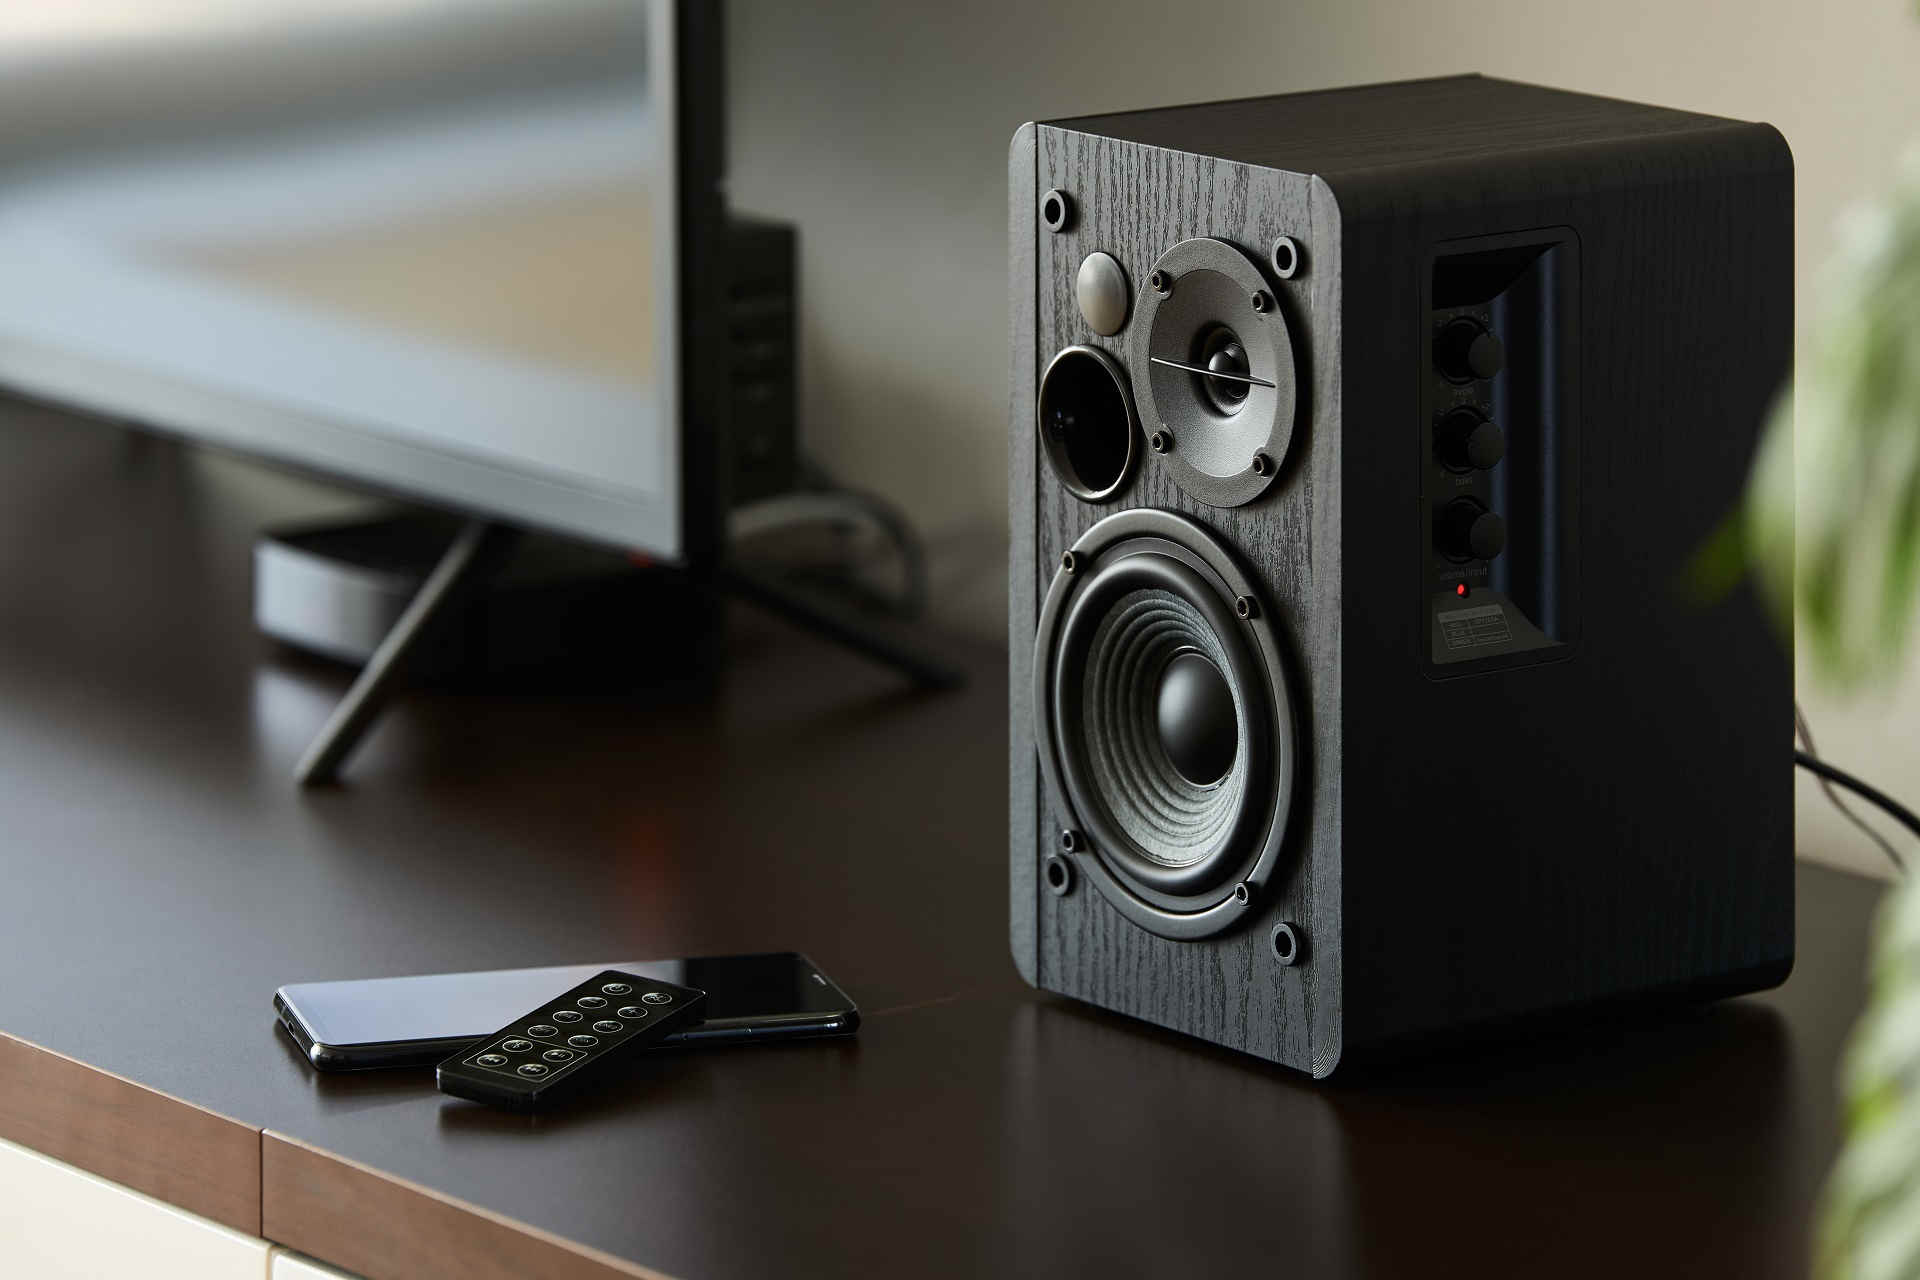 How to fix high pitch sound from speakers on Windows 10